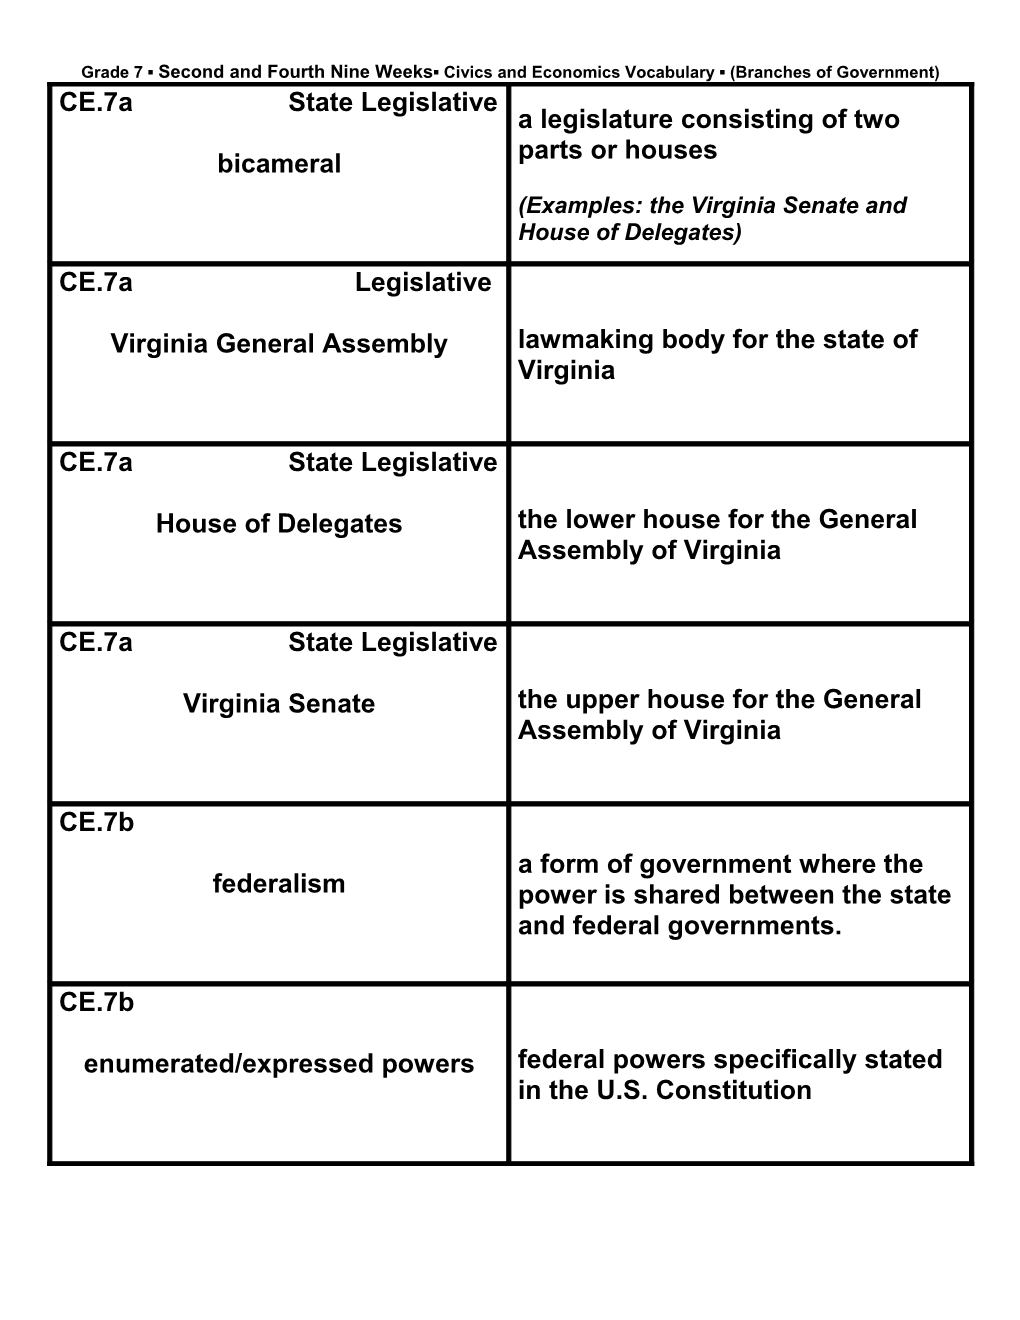 Grade 7 Second and Fourth Nine Weeks Civics and Economics Vocabulary (Branches of Government)